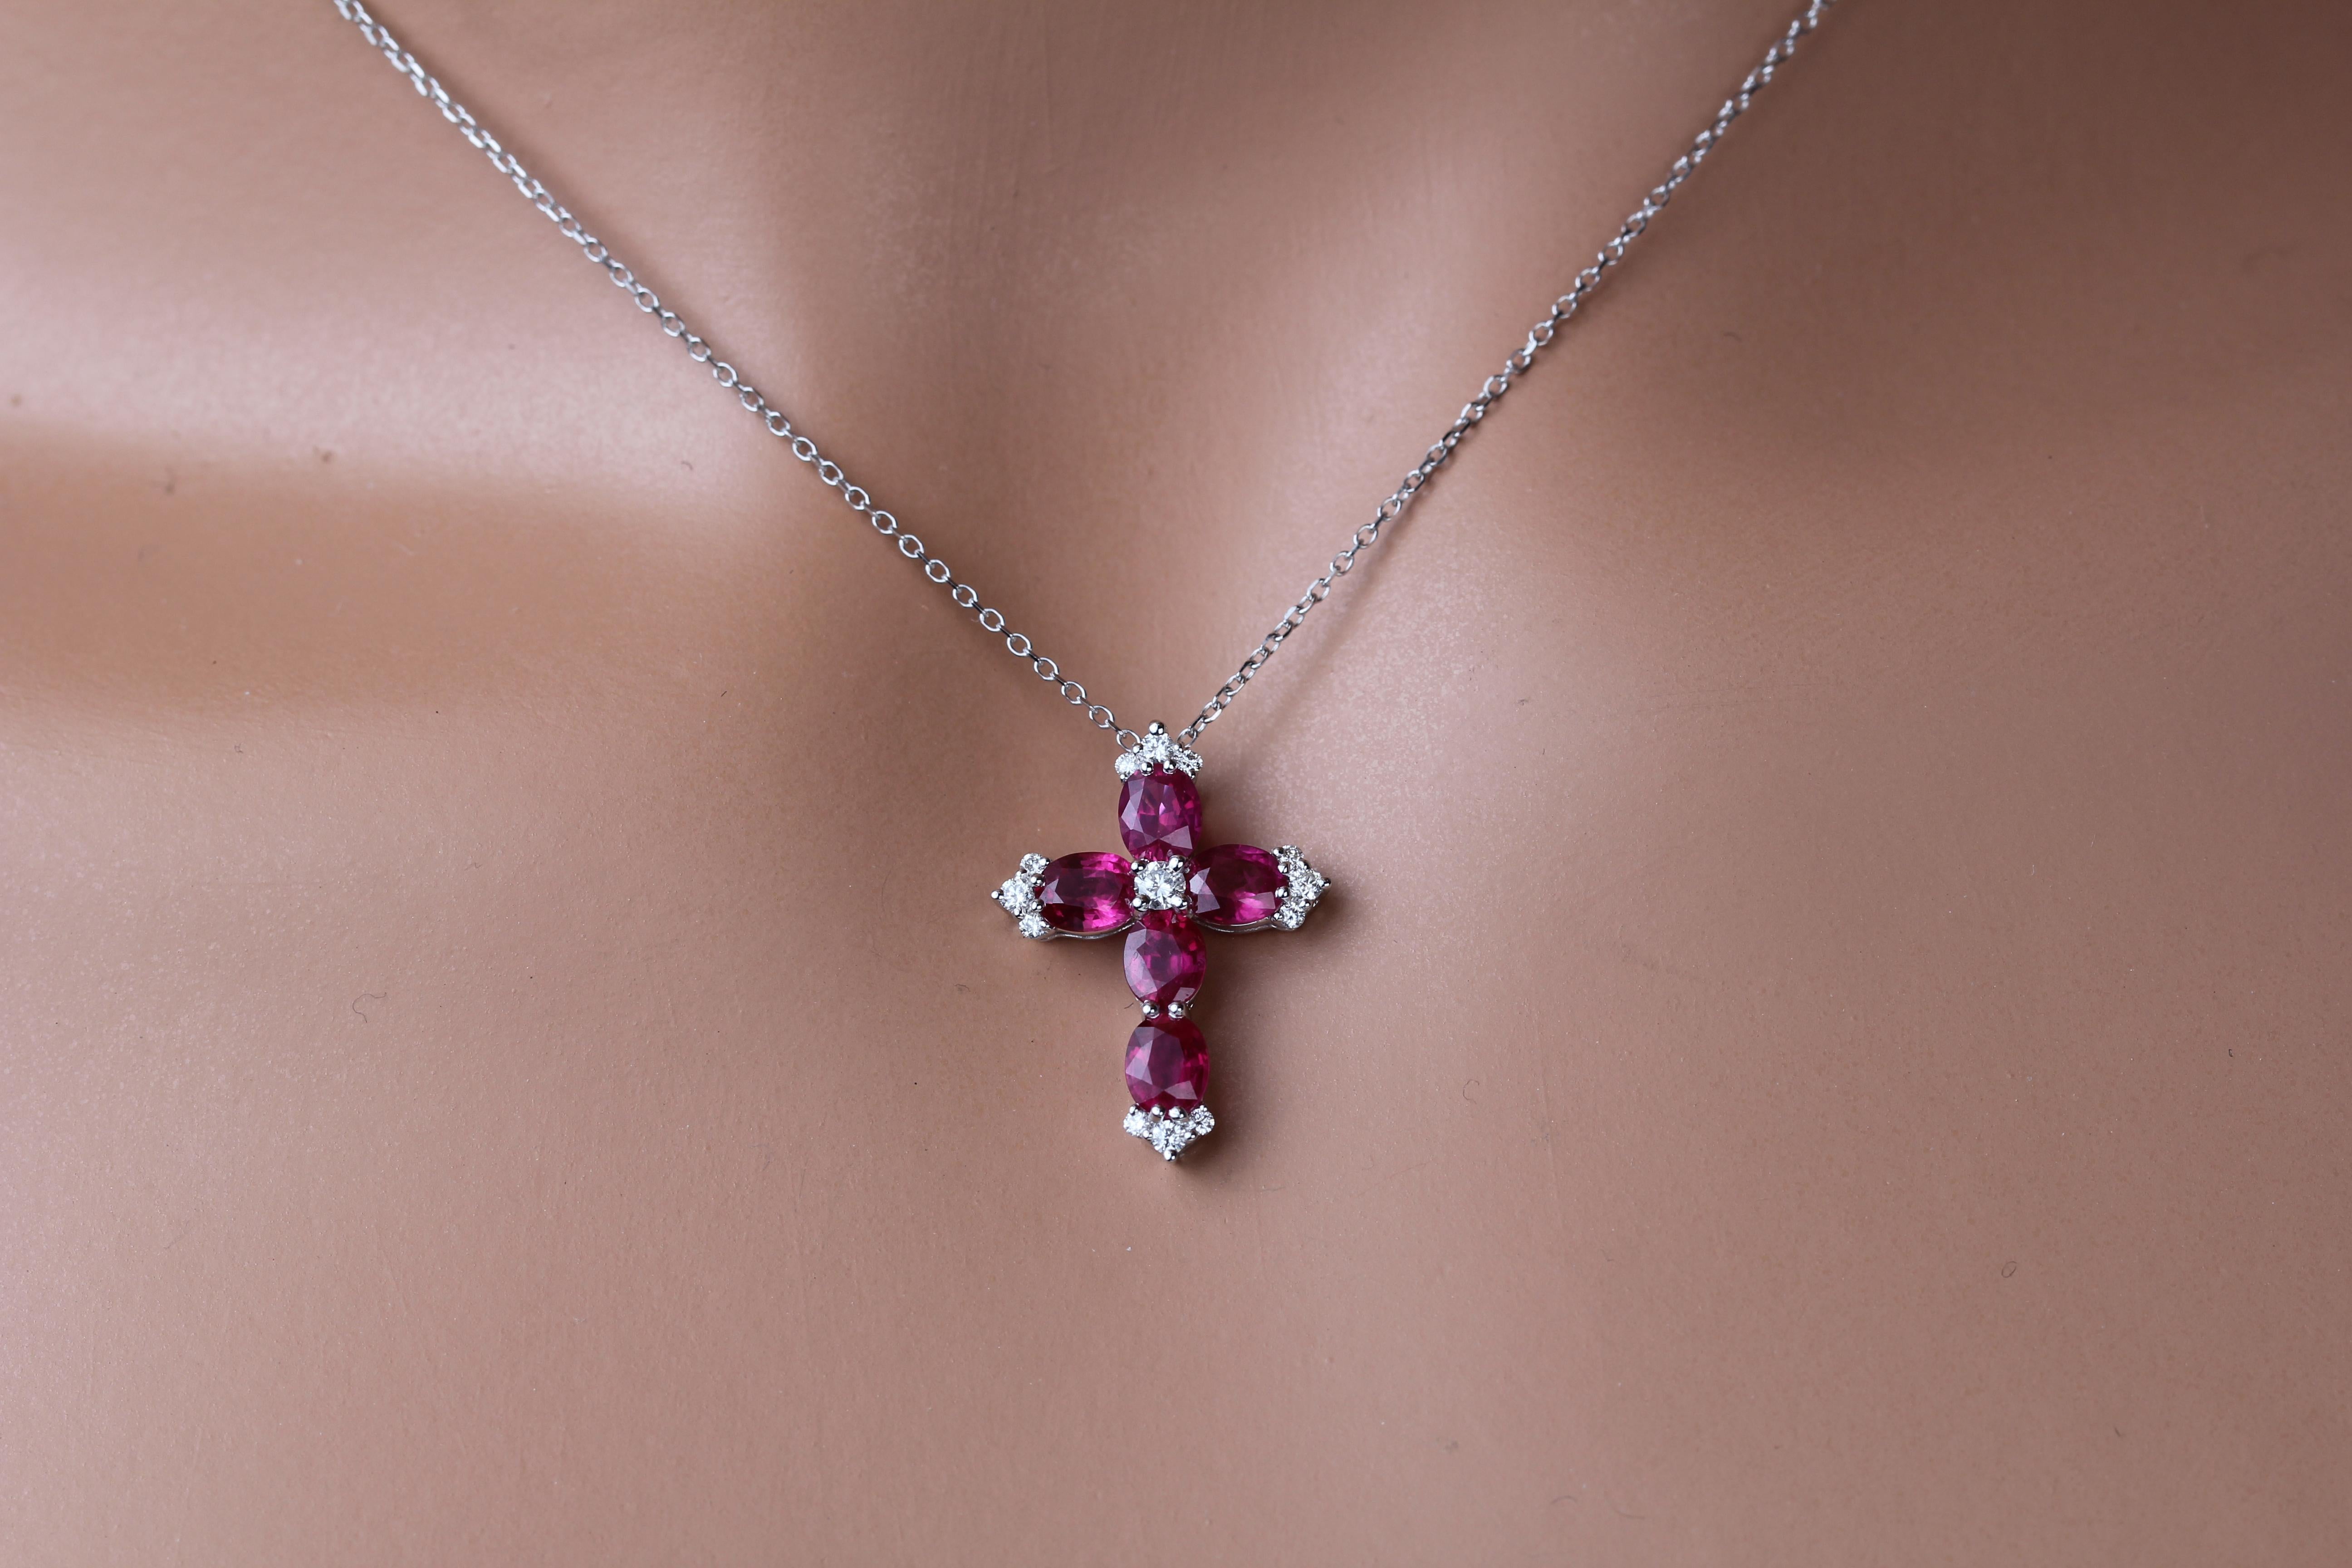 This stunning cross pendant features five oval cut vivid red rubies (total weight 1.56 carats), around a central round diamond. Additional trios of round diamonds decorate the four points of the cross. The total diamond weight is 0.15 carats.

Set